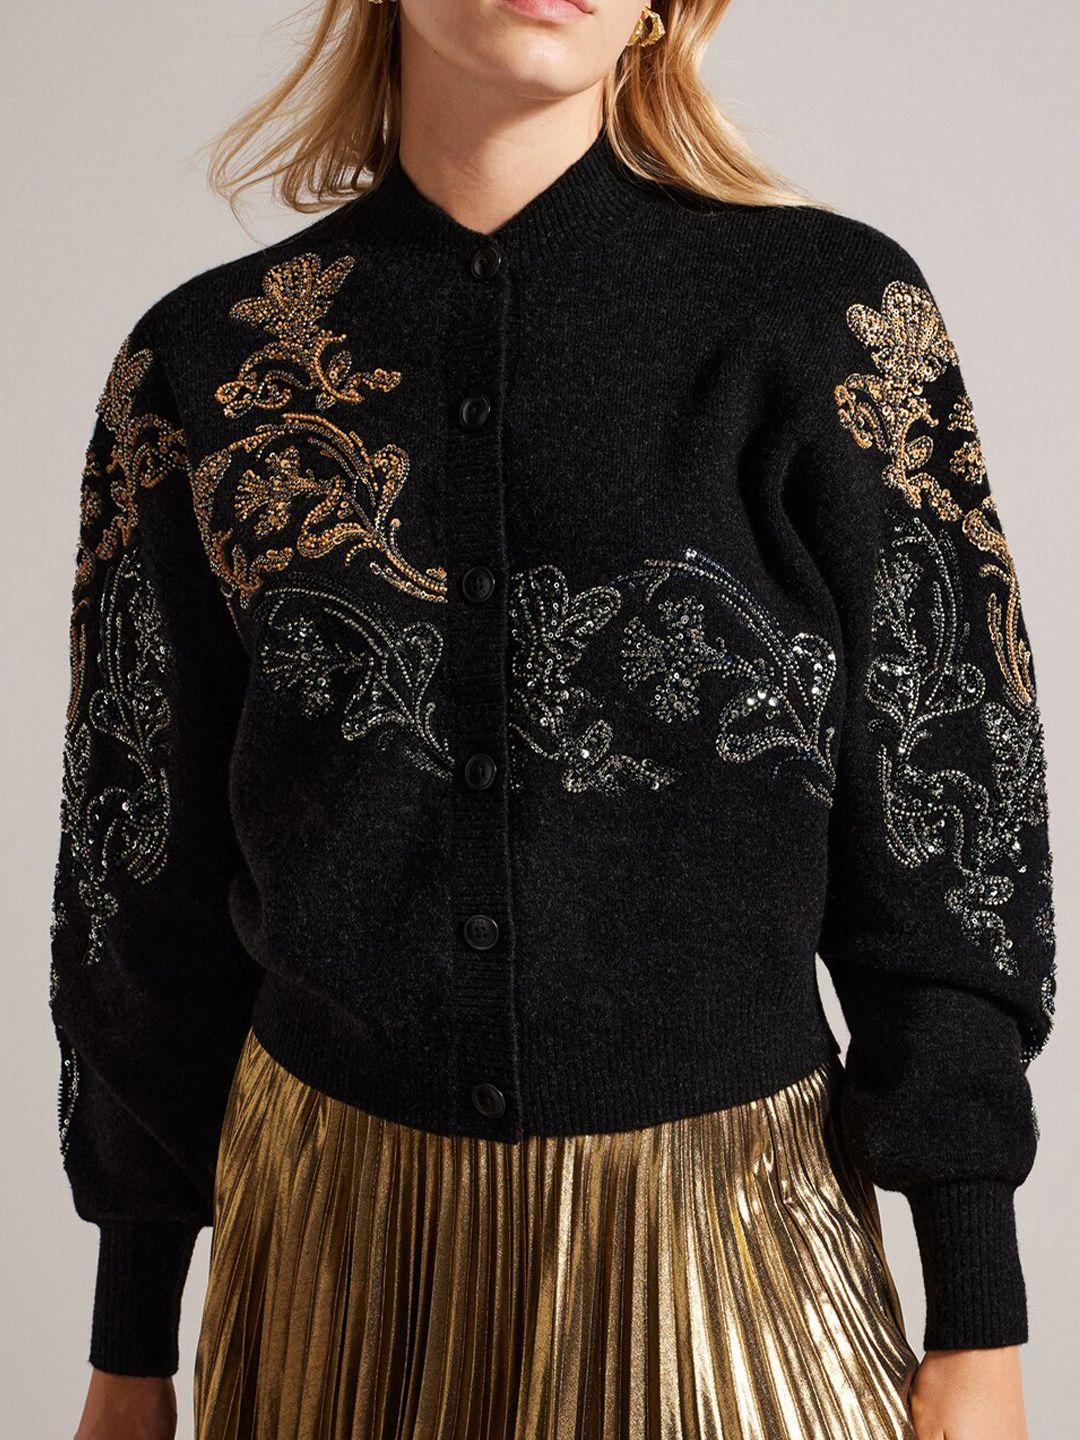 ted-baker-embroidered-round-neck-long-sleeves-embellished-cardigan-sweaters